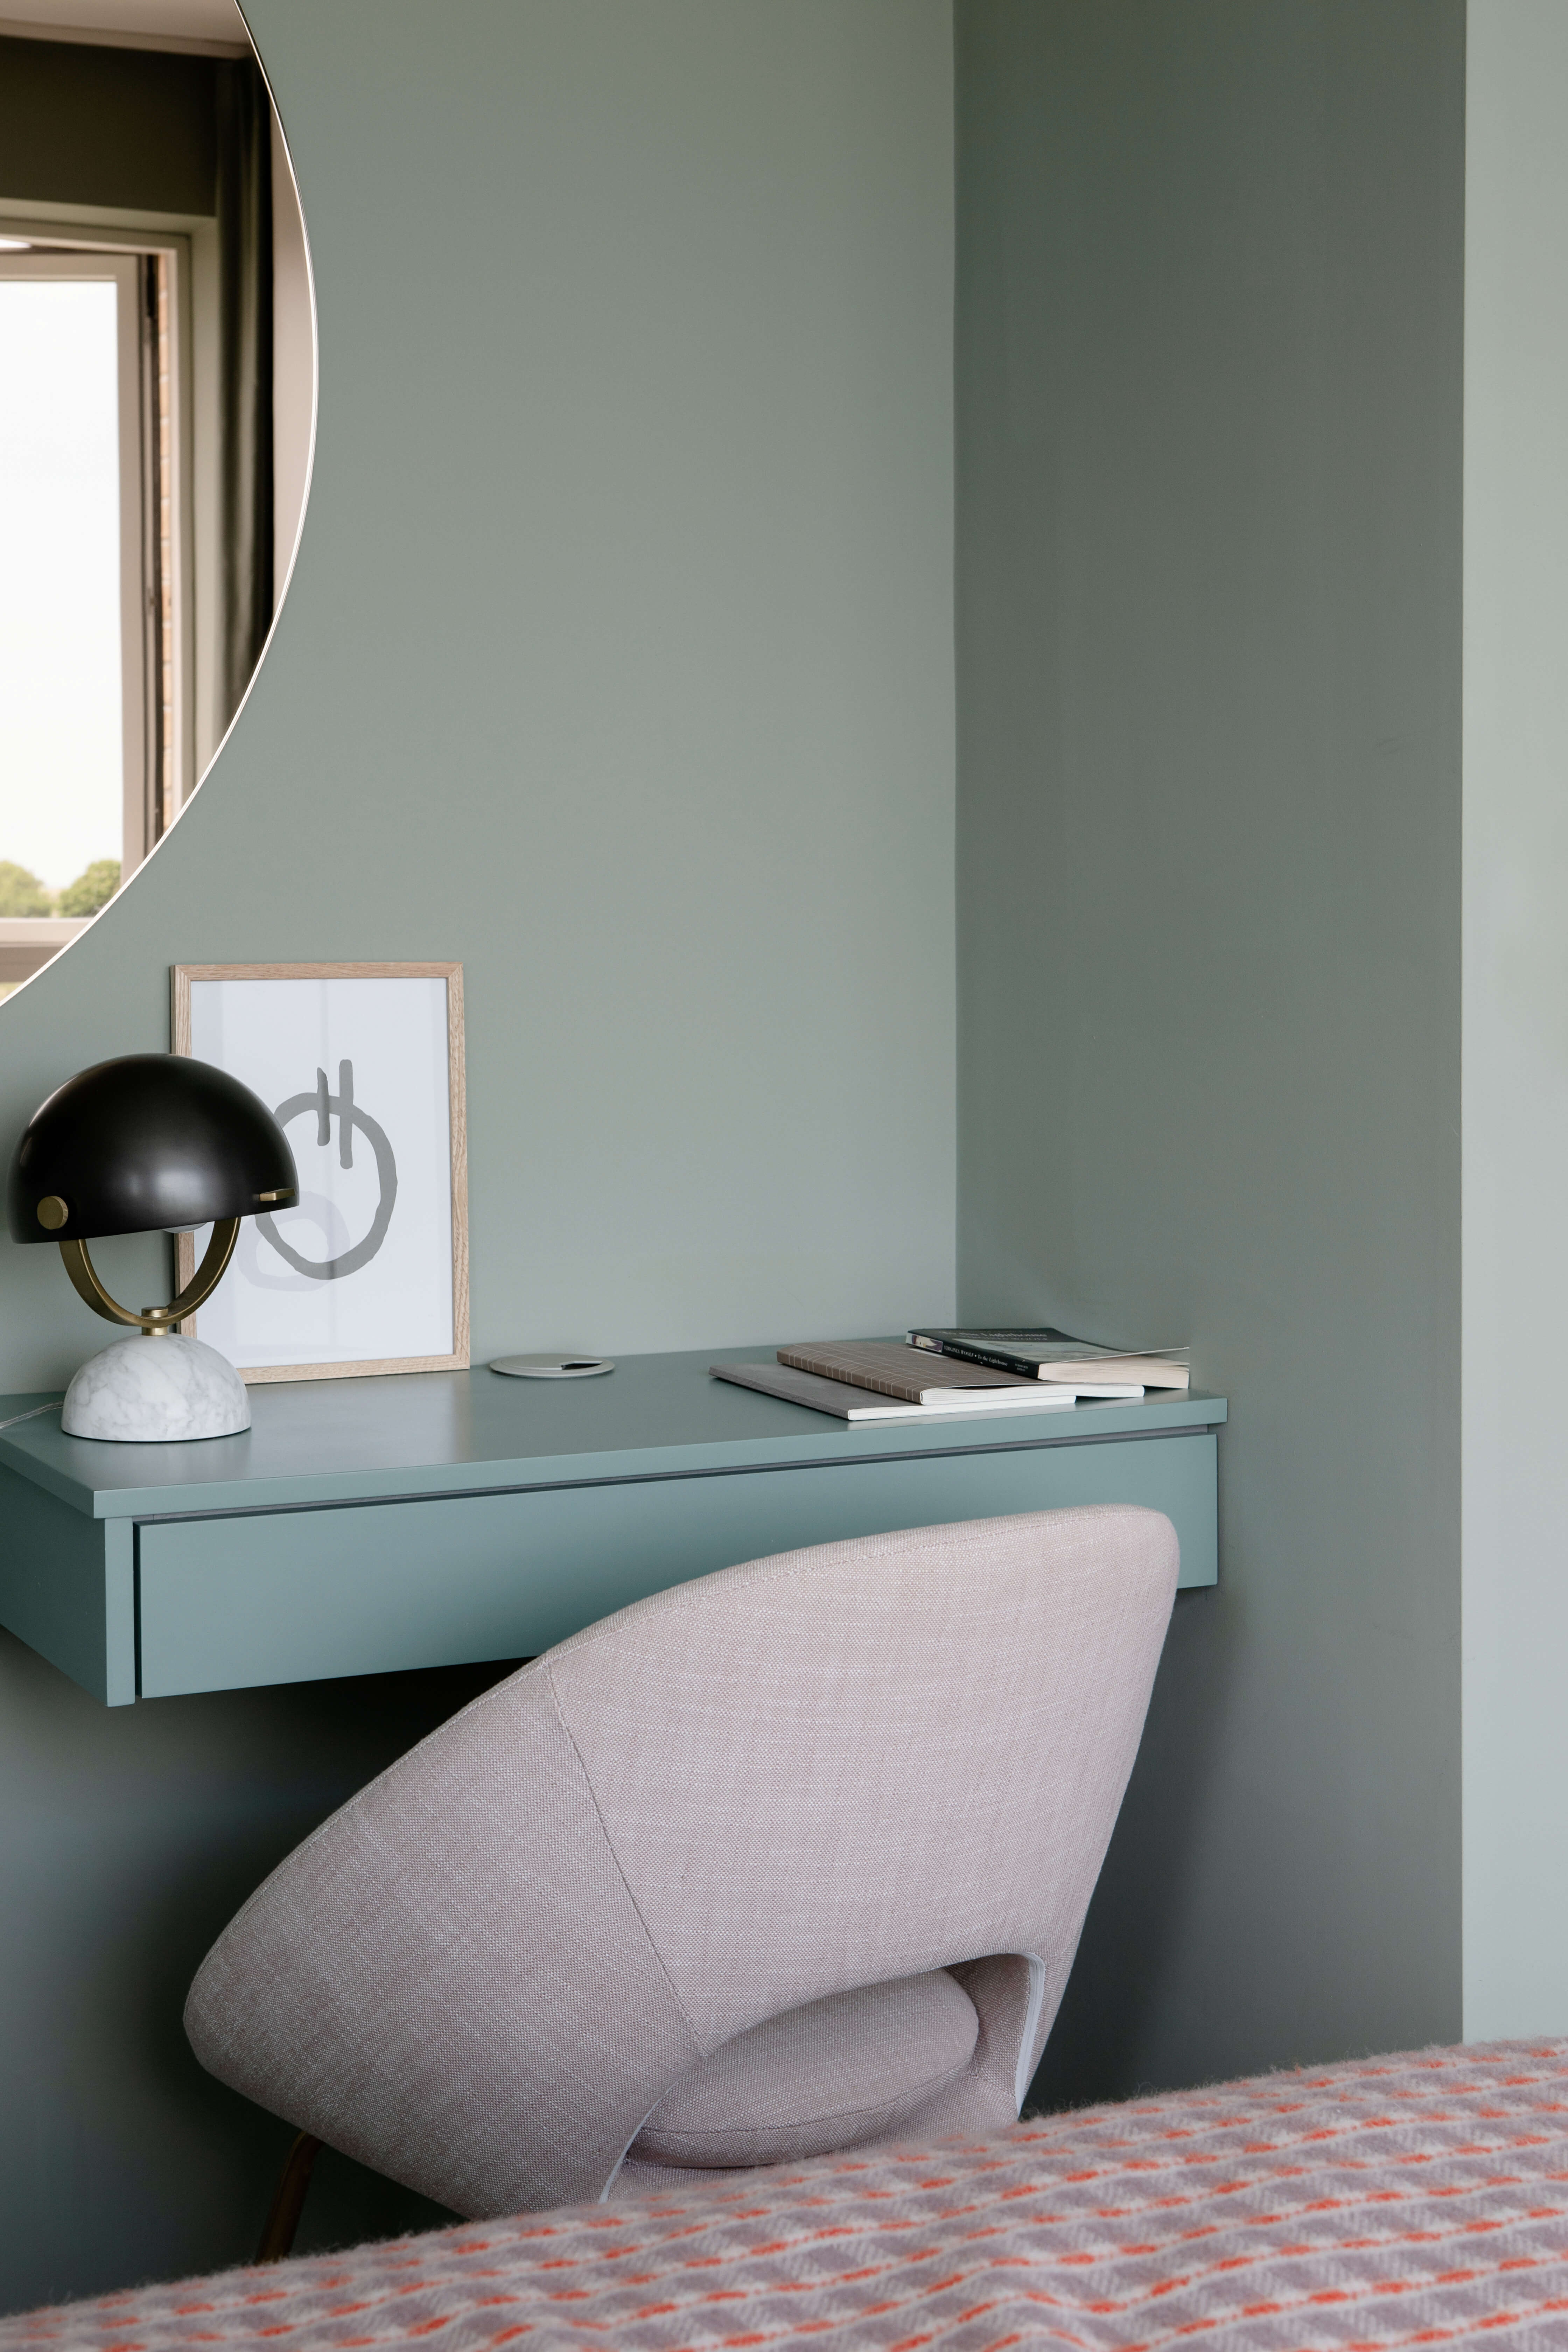 Create a dressing area in a bedroom with bespoke joinery